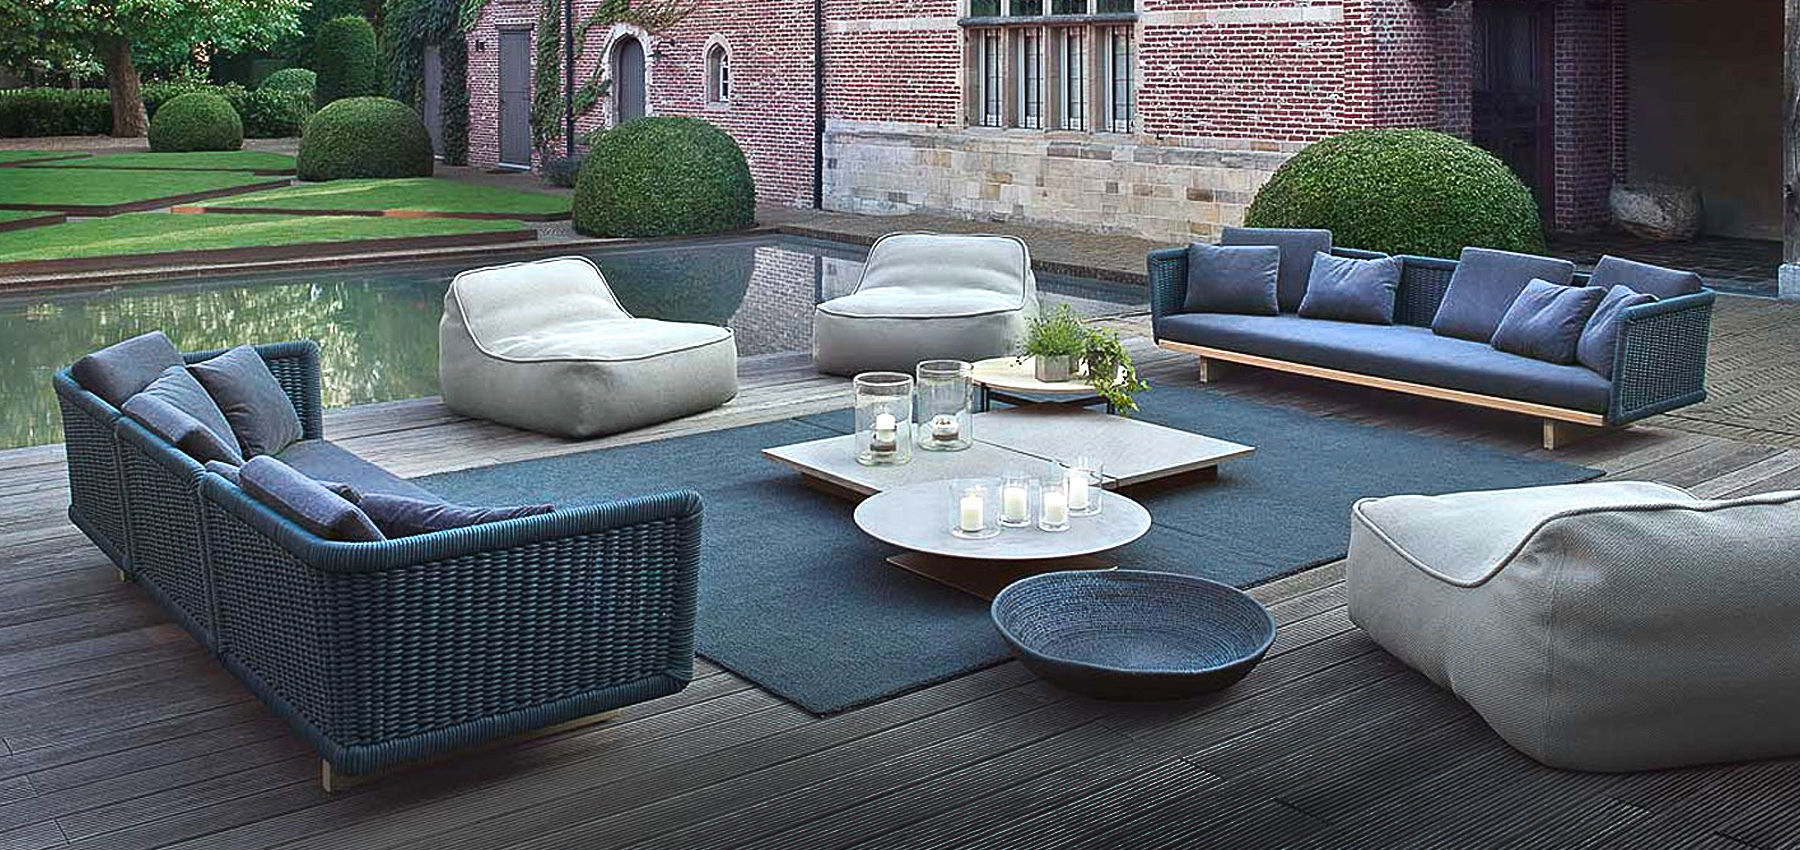 Best Luxury High-End Outdoor Furniture Brands [2020 Guide] In Hudson, New York